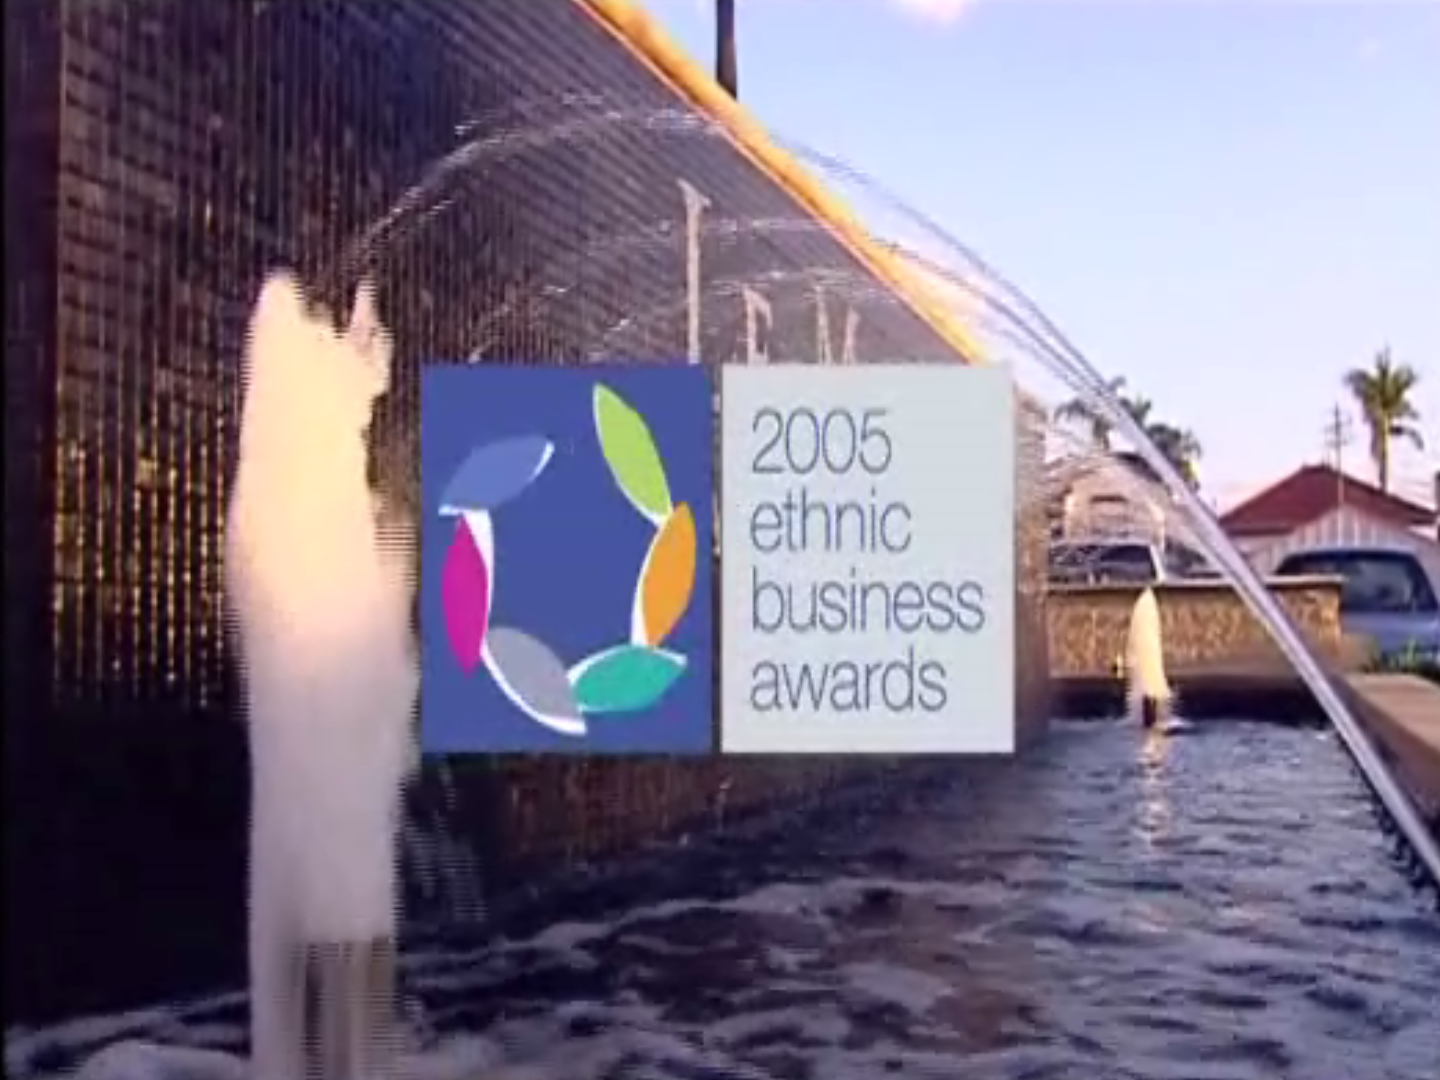 *Video:2005 ethnic business awards